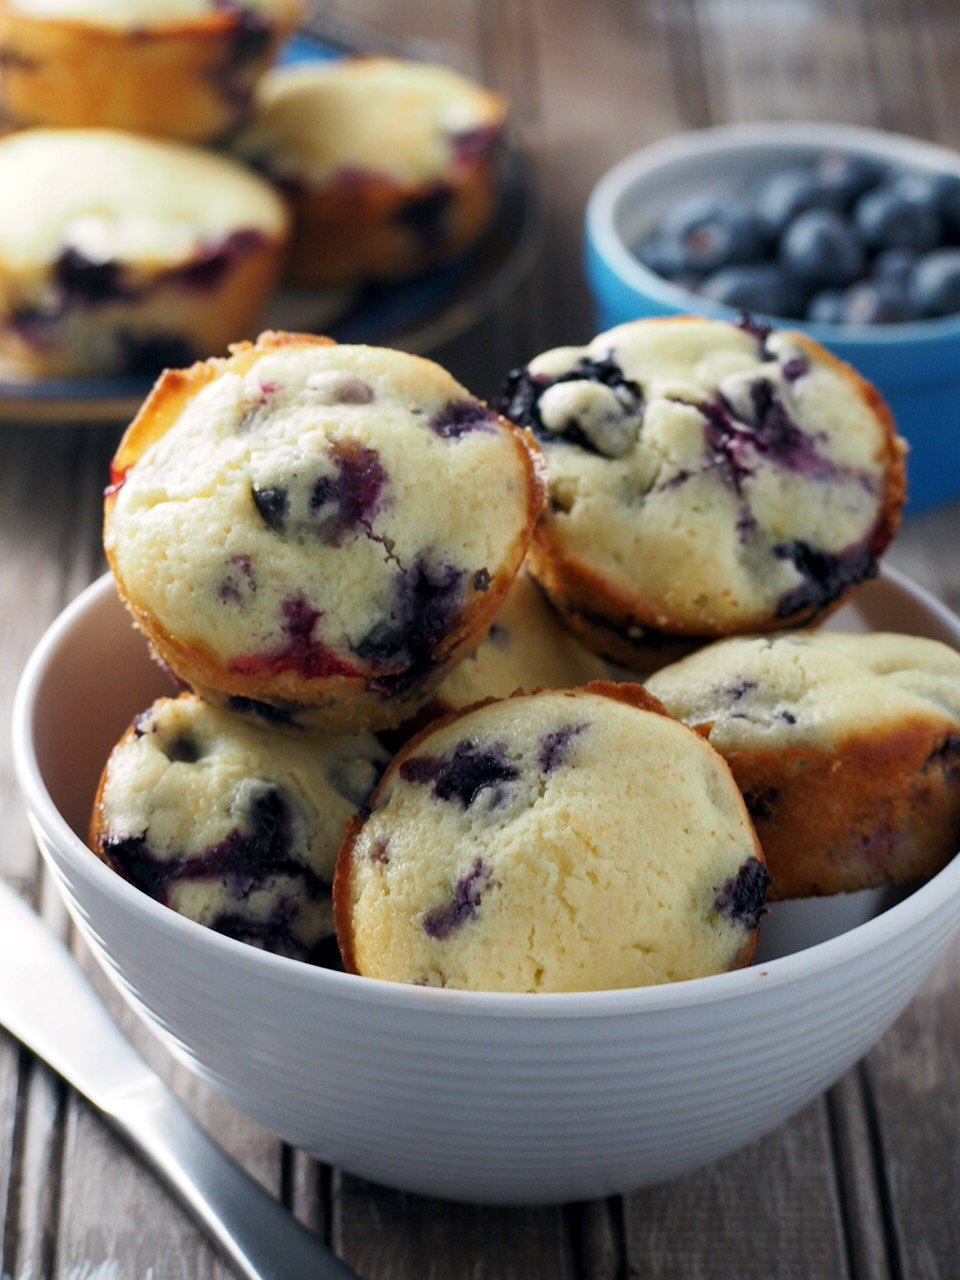 These Blueberry Muffins are delectable bites of melt in your mouth cake crumbs with a hint of freshness from the soft berries.